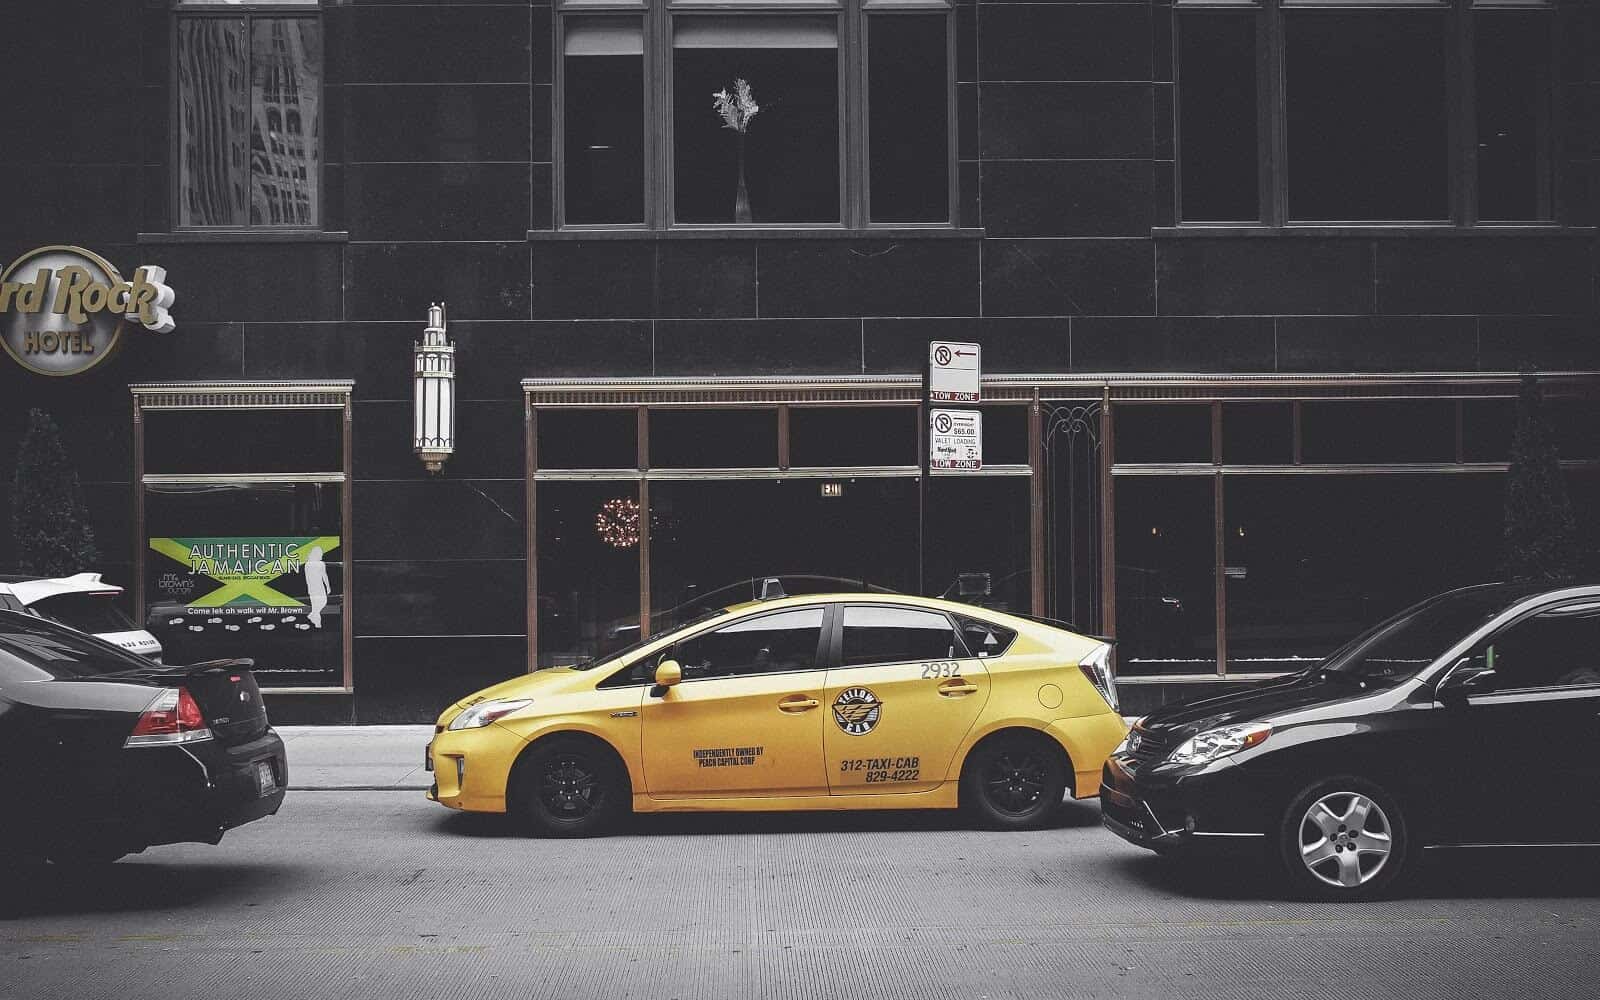 Taxi parked in front of downtown building